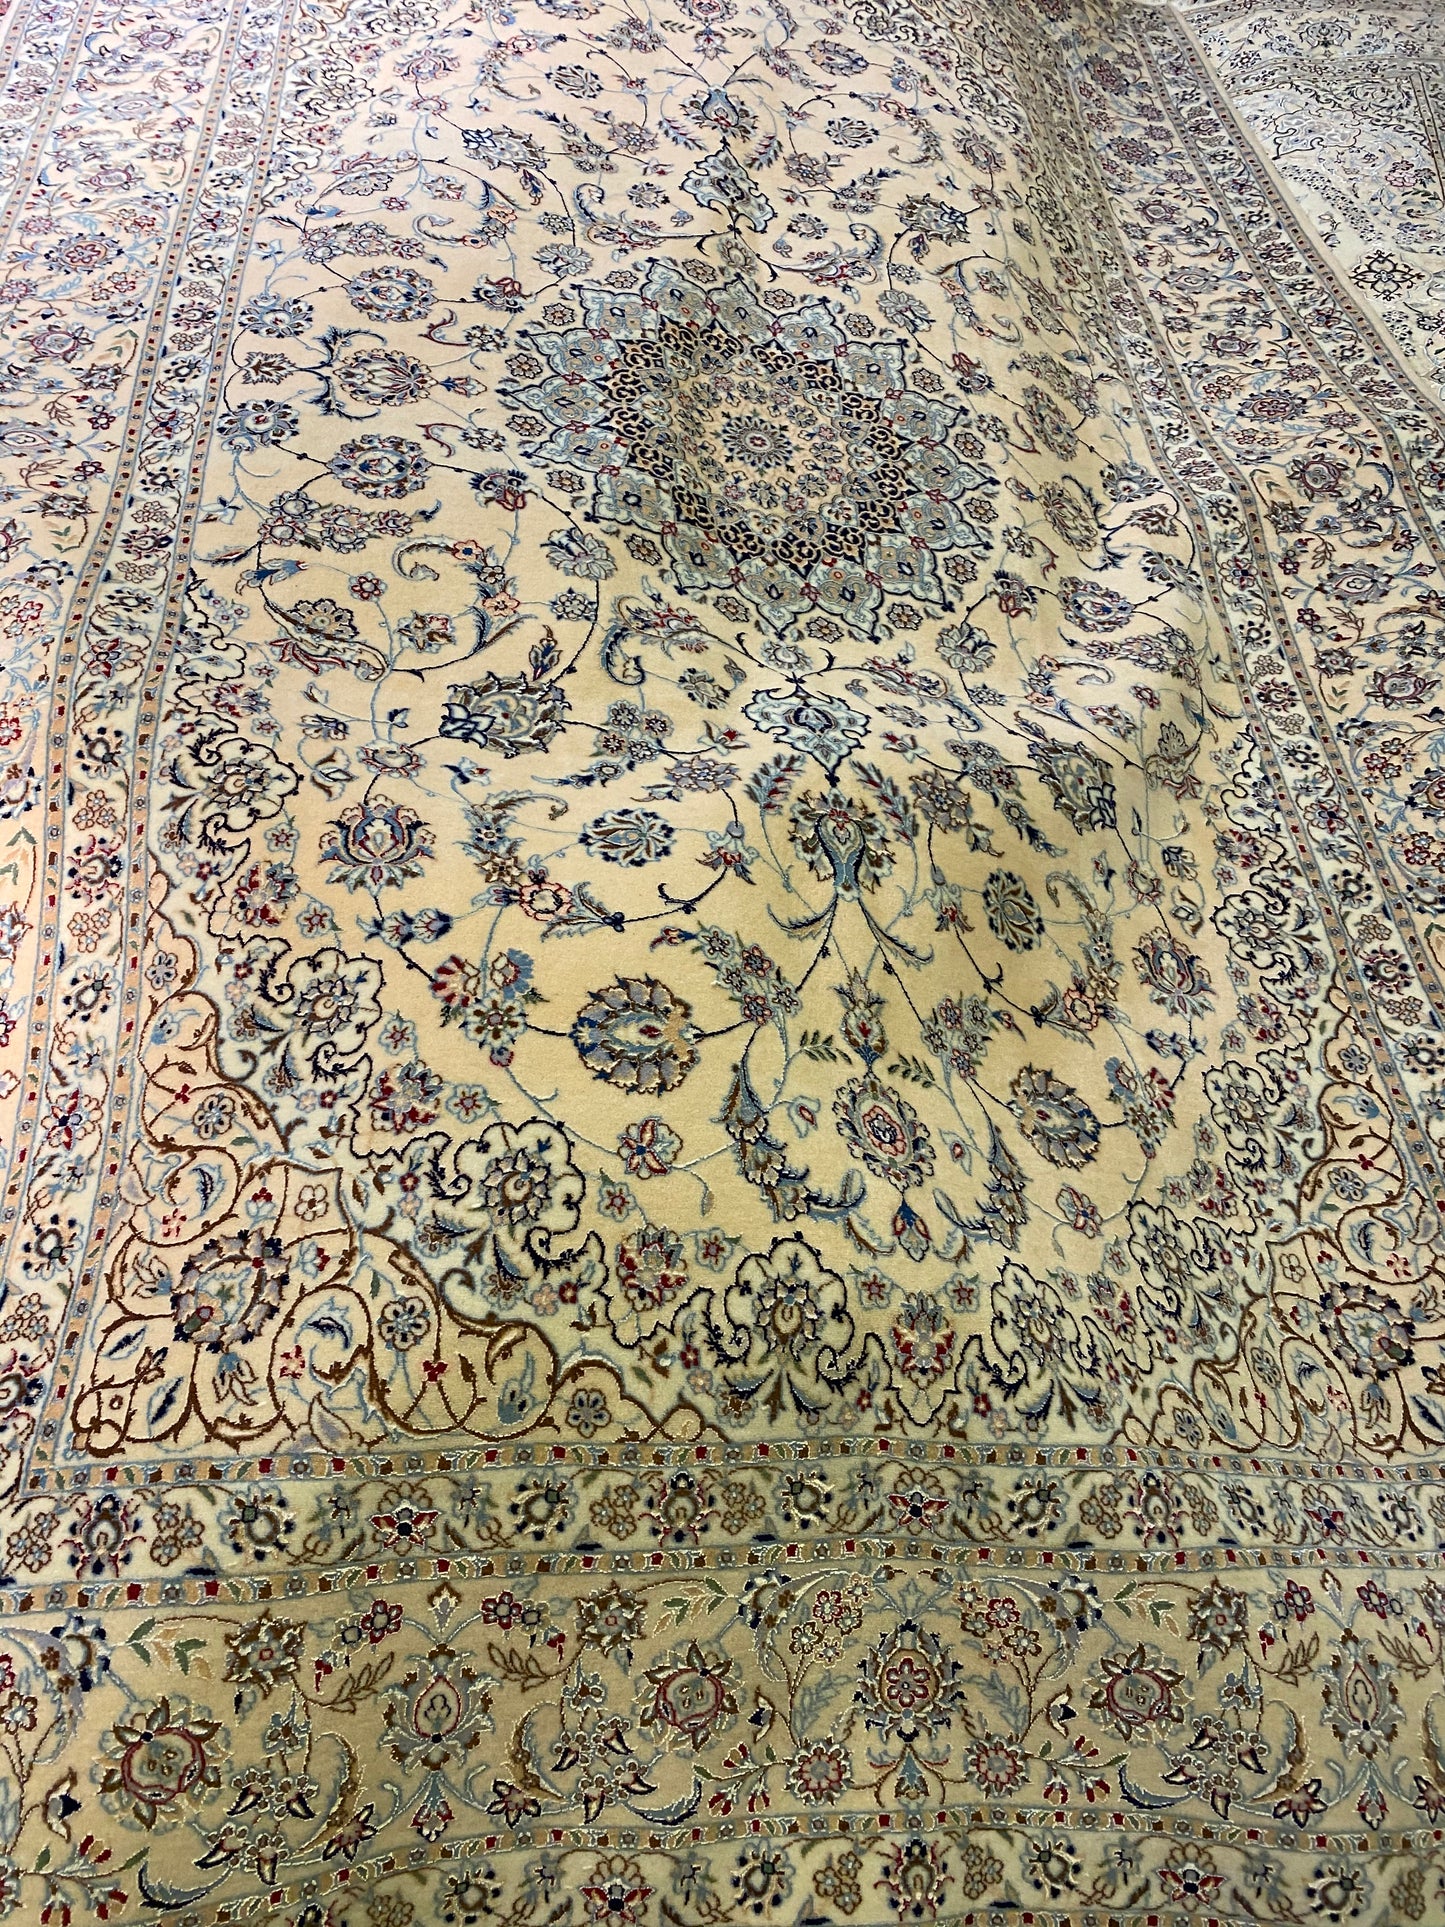 An amazing Persian Nain 6La carpet made of the purest korkwool, with silkinlays. Size 200x300 cm.